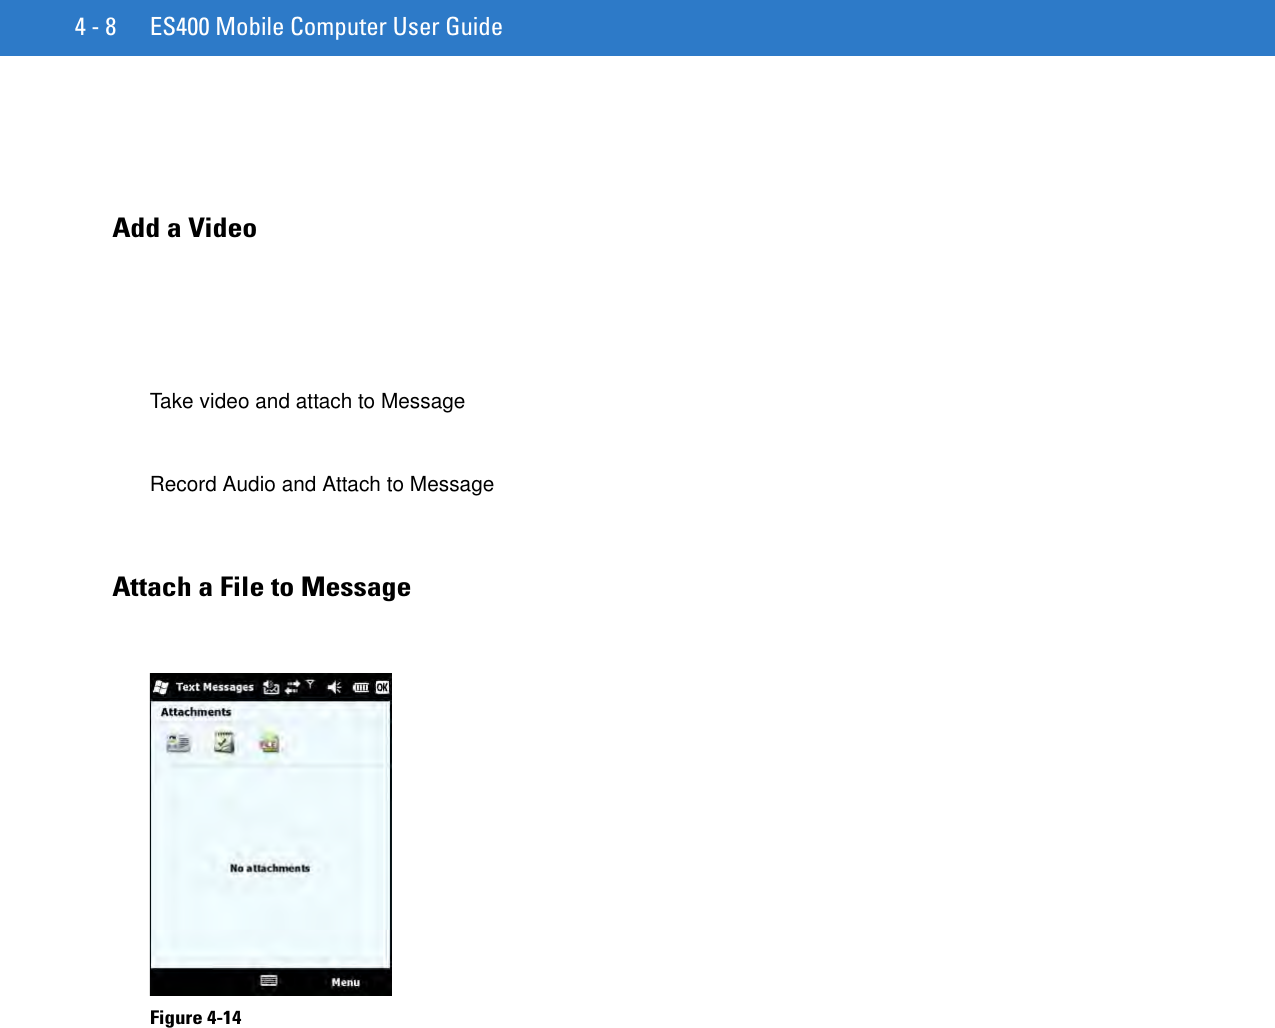 4 - 8 ES400 Mobile Computer User GuideAdd a VideoTake video and attach to MessageRecord Audio and Attach to MessageAttach a File to MessageFigure 4-14    